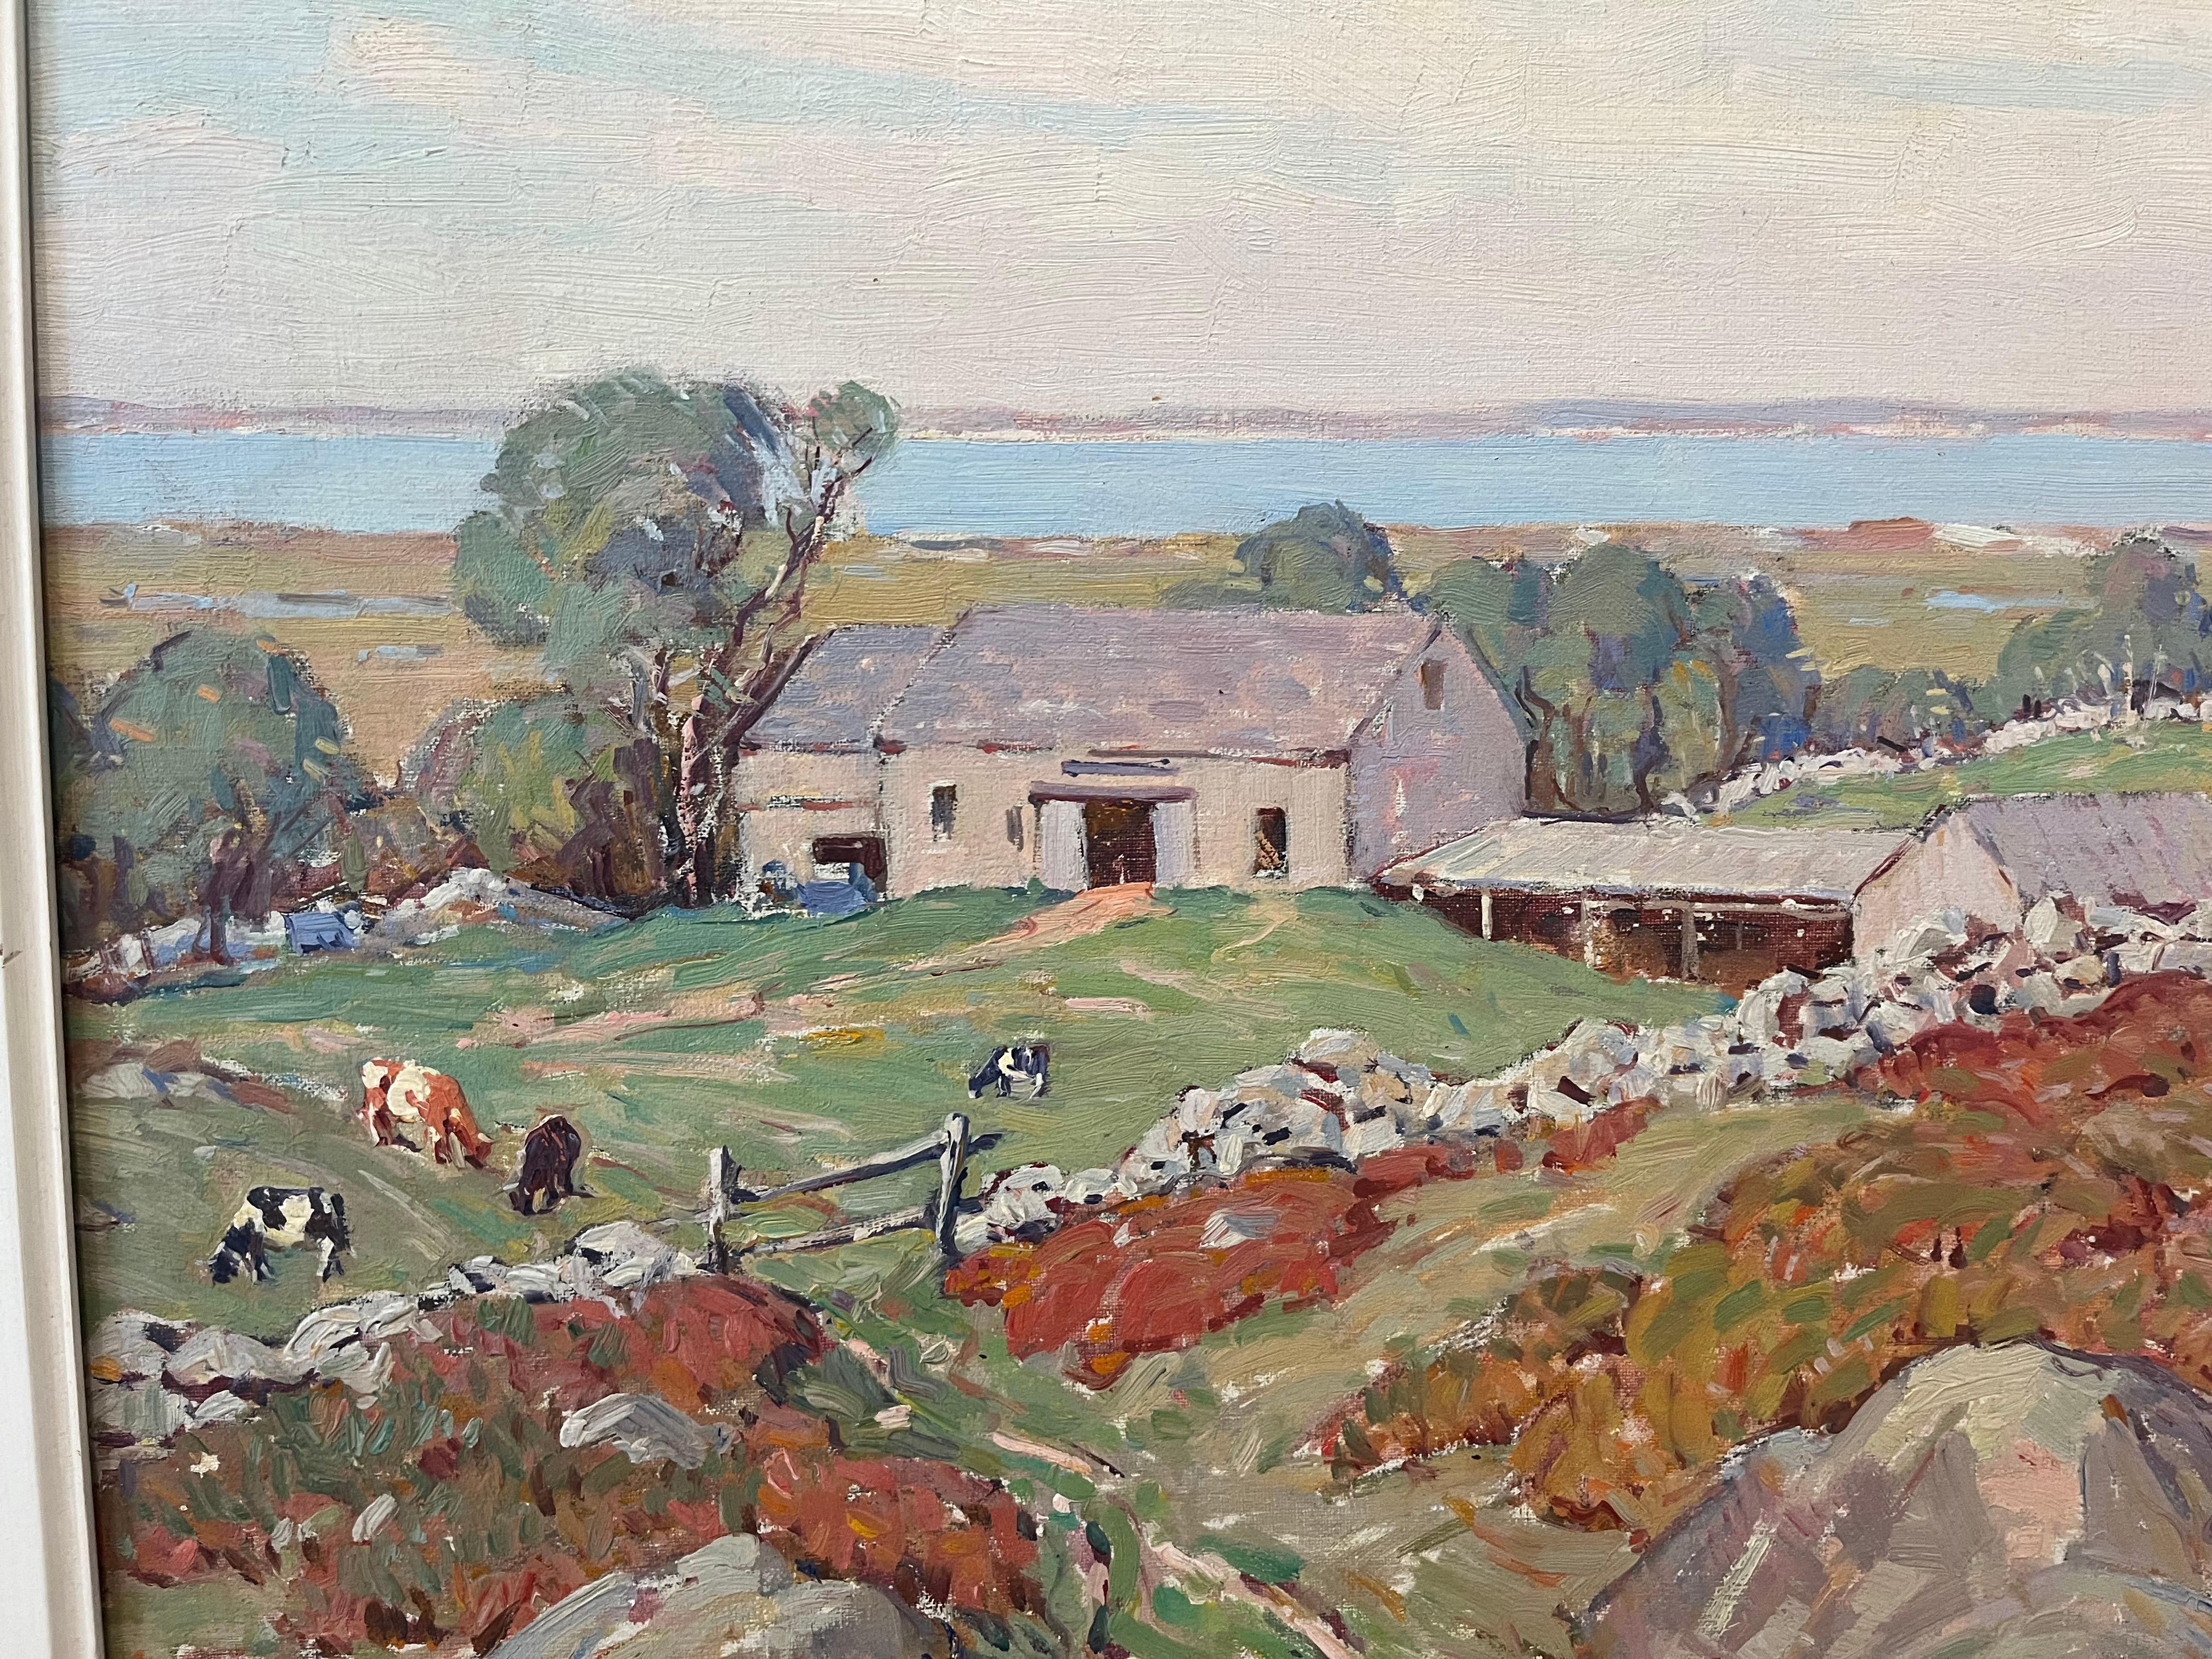 This is a beautiful Cape Cod Massachusetts spring landscape with a rural farm and water behind it was painted by American artist Aldro Thompson Hibbard (1886-1972). Hibbard was born in Falmouth, Vermont and later became one of the founders of the